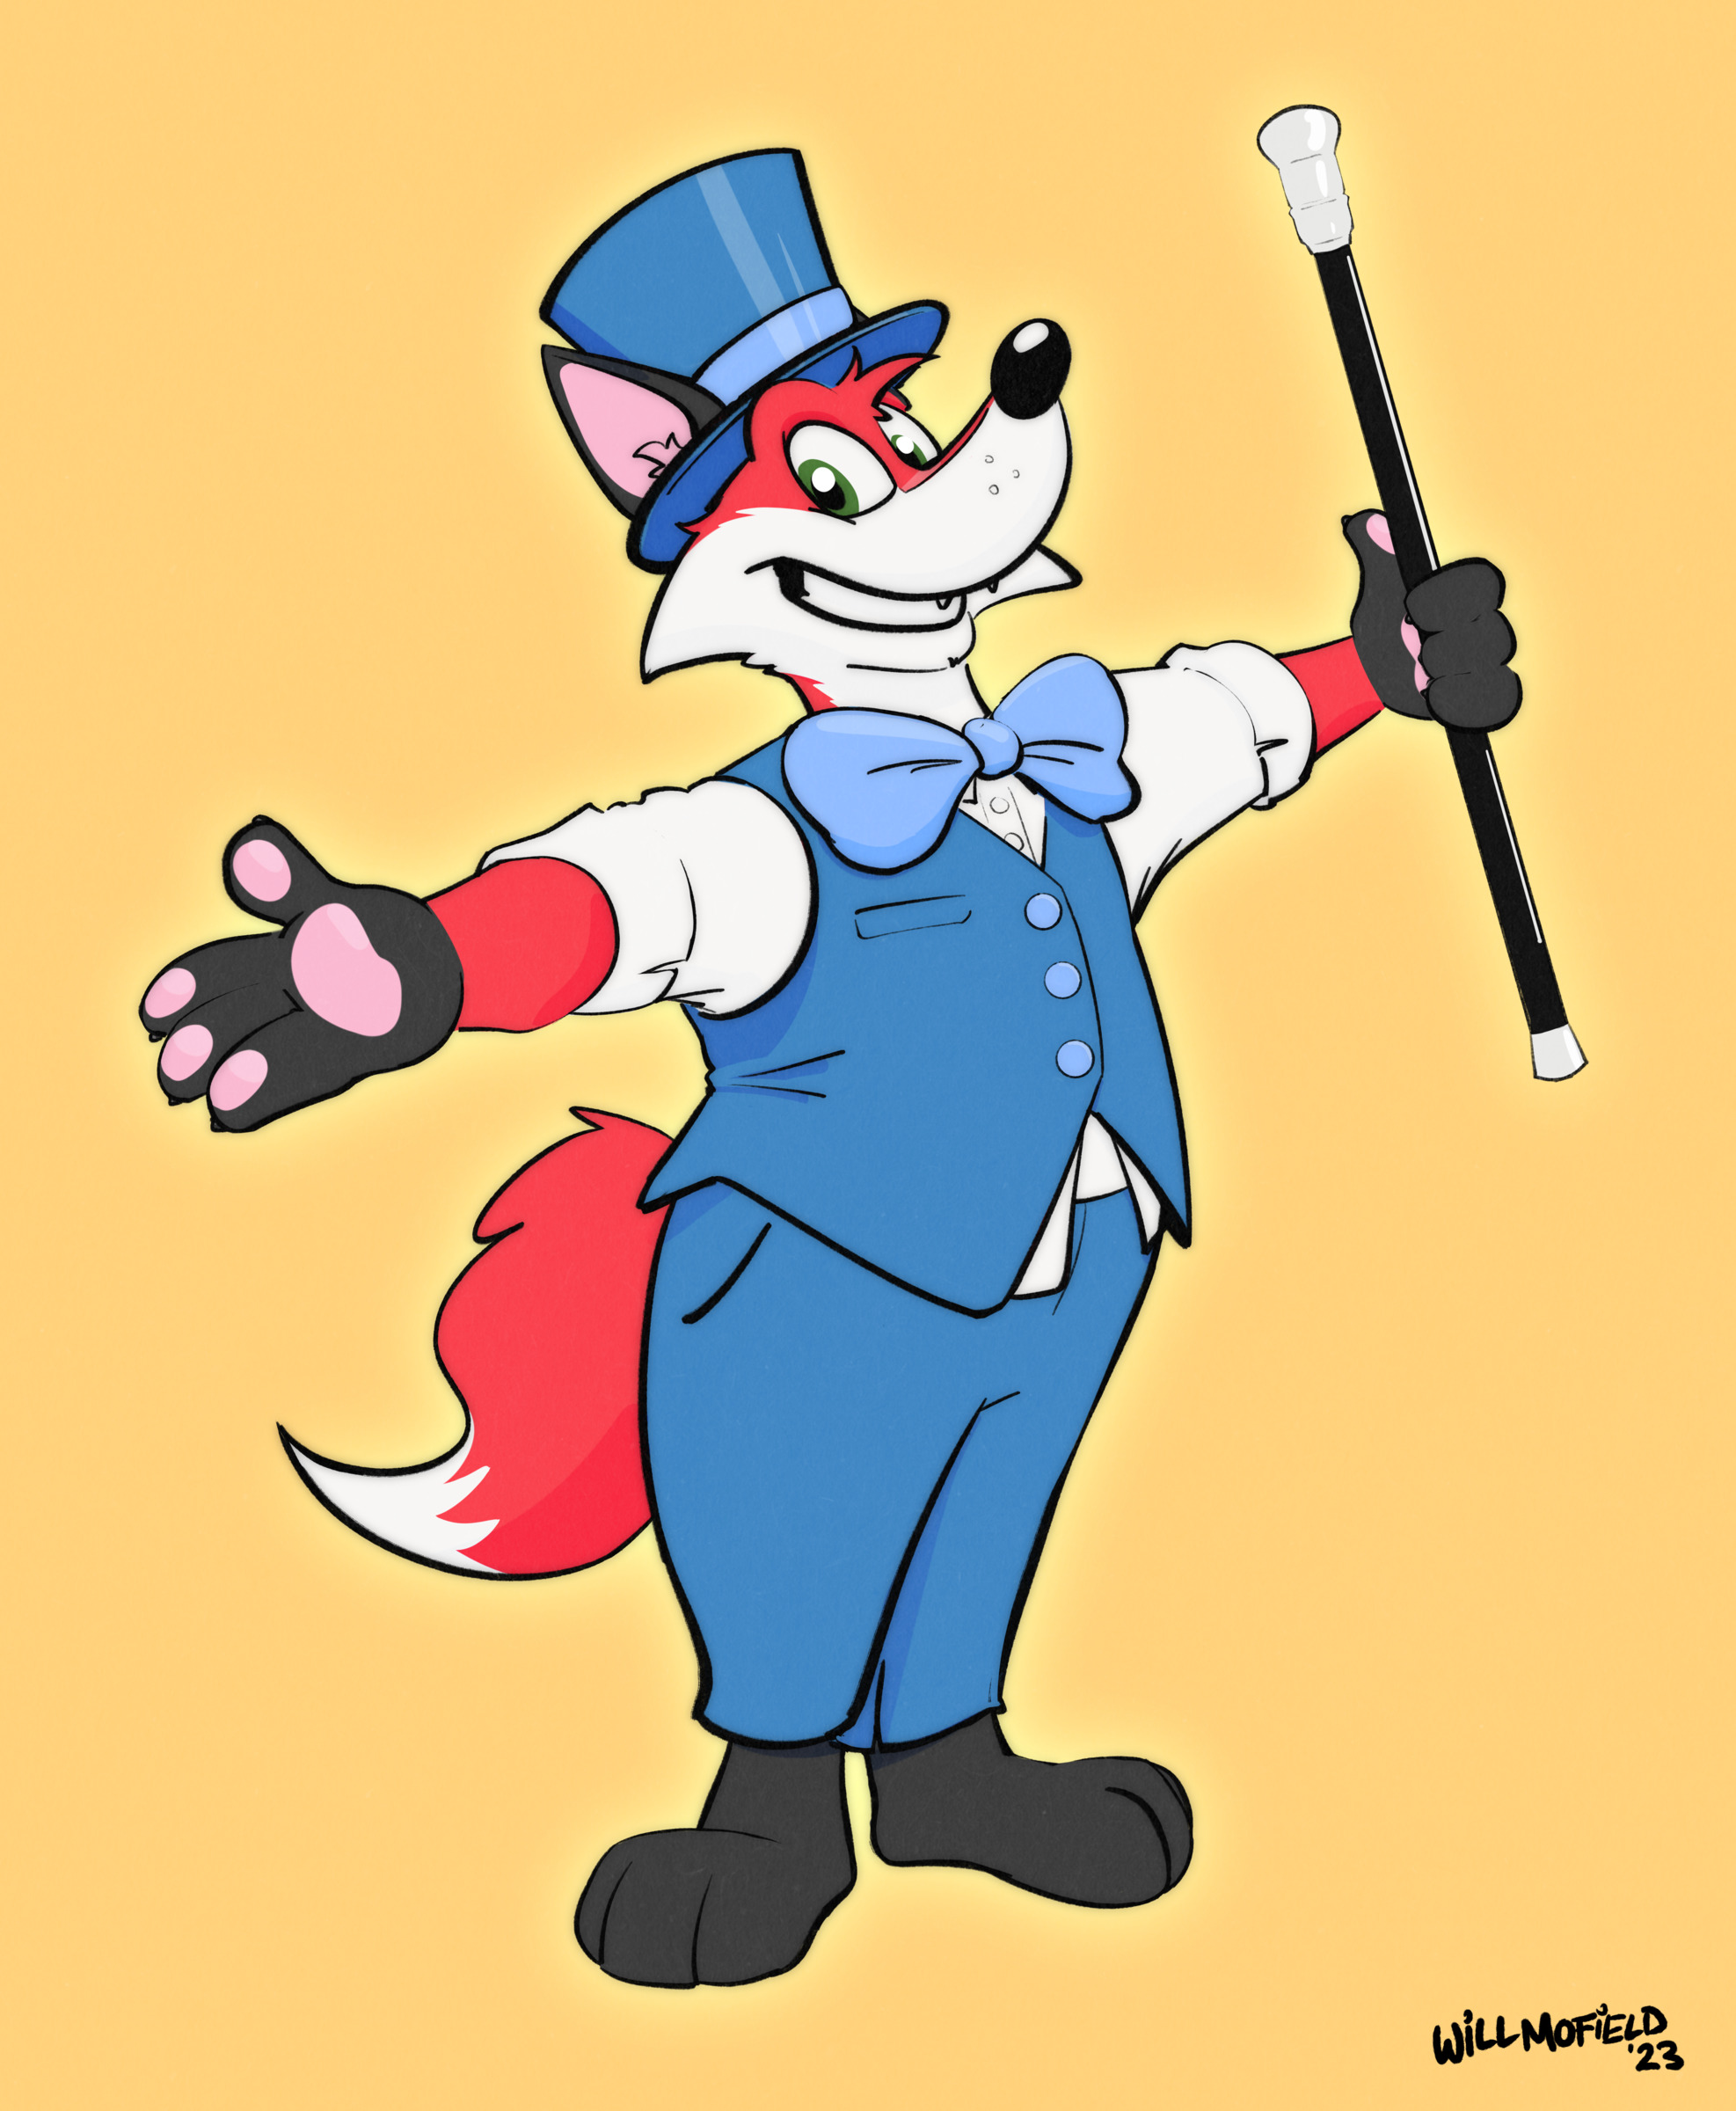 A cartoon fox in a blue suit and top hat poses with a big smile.